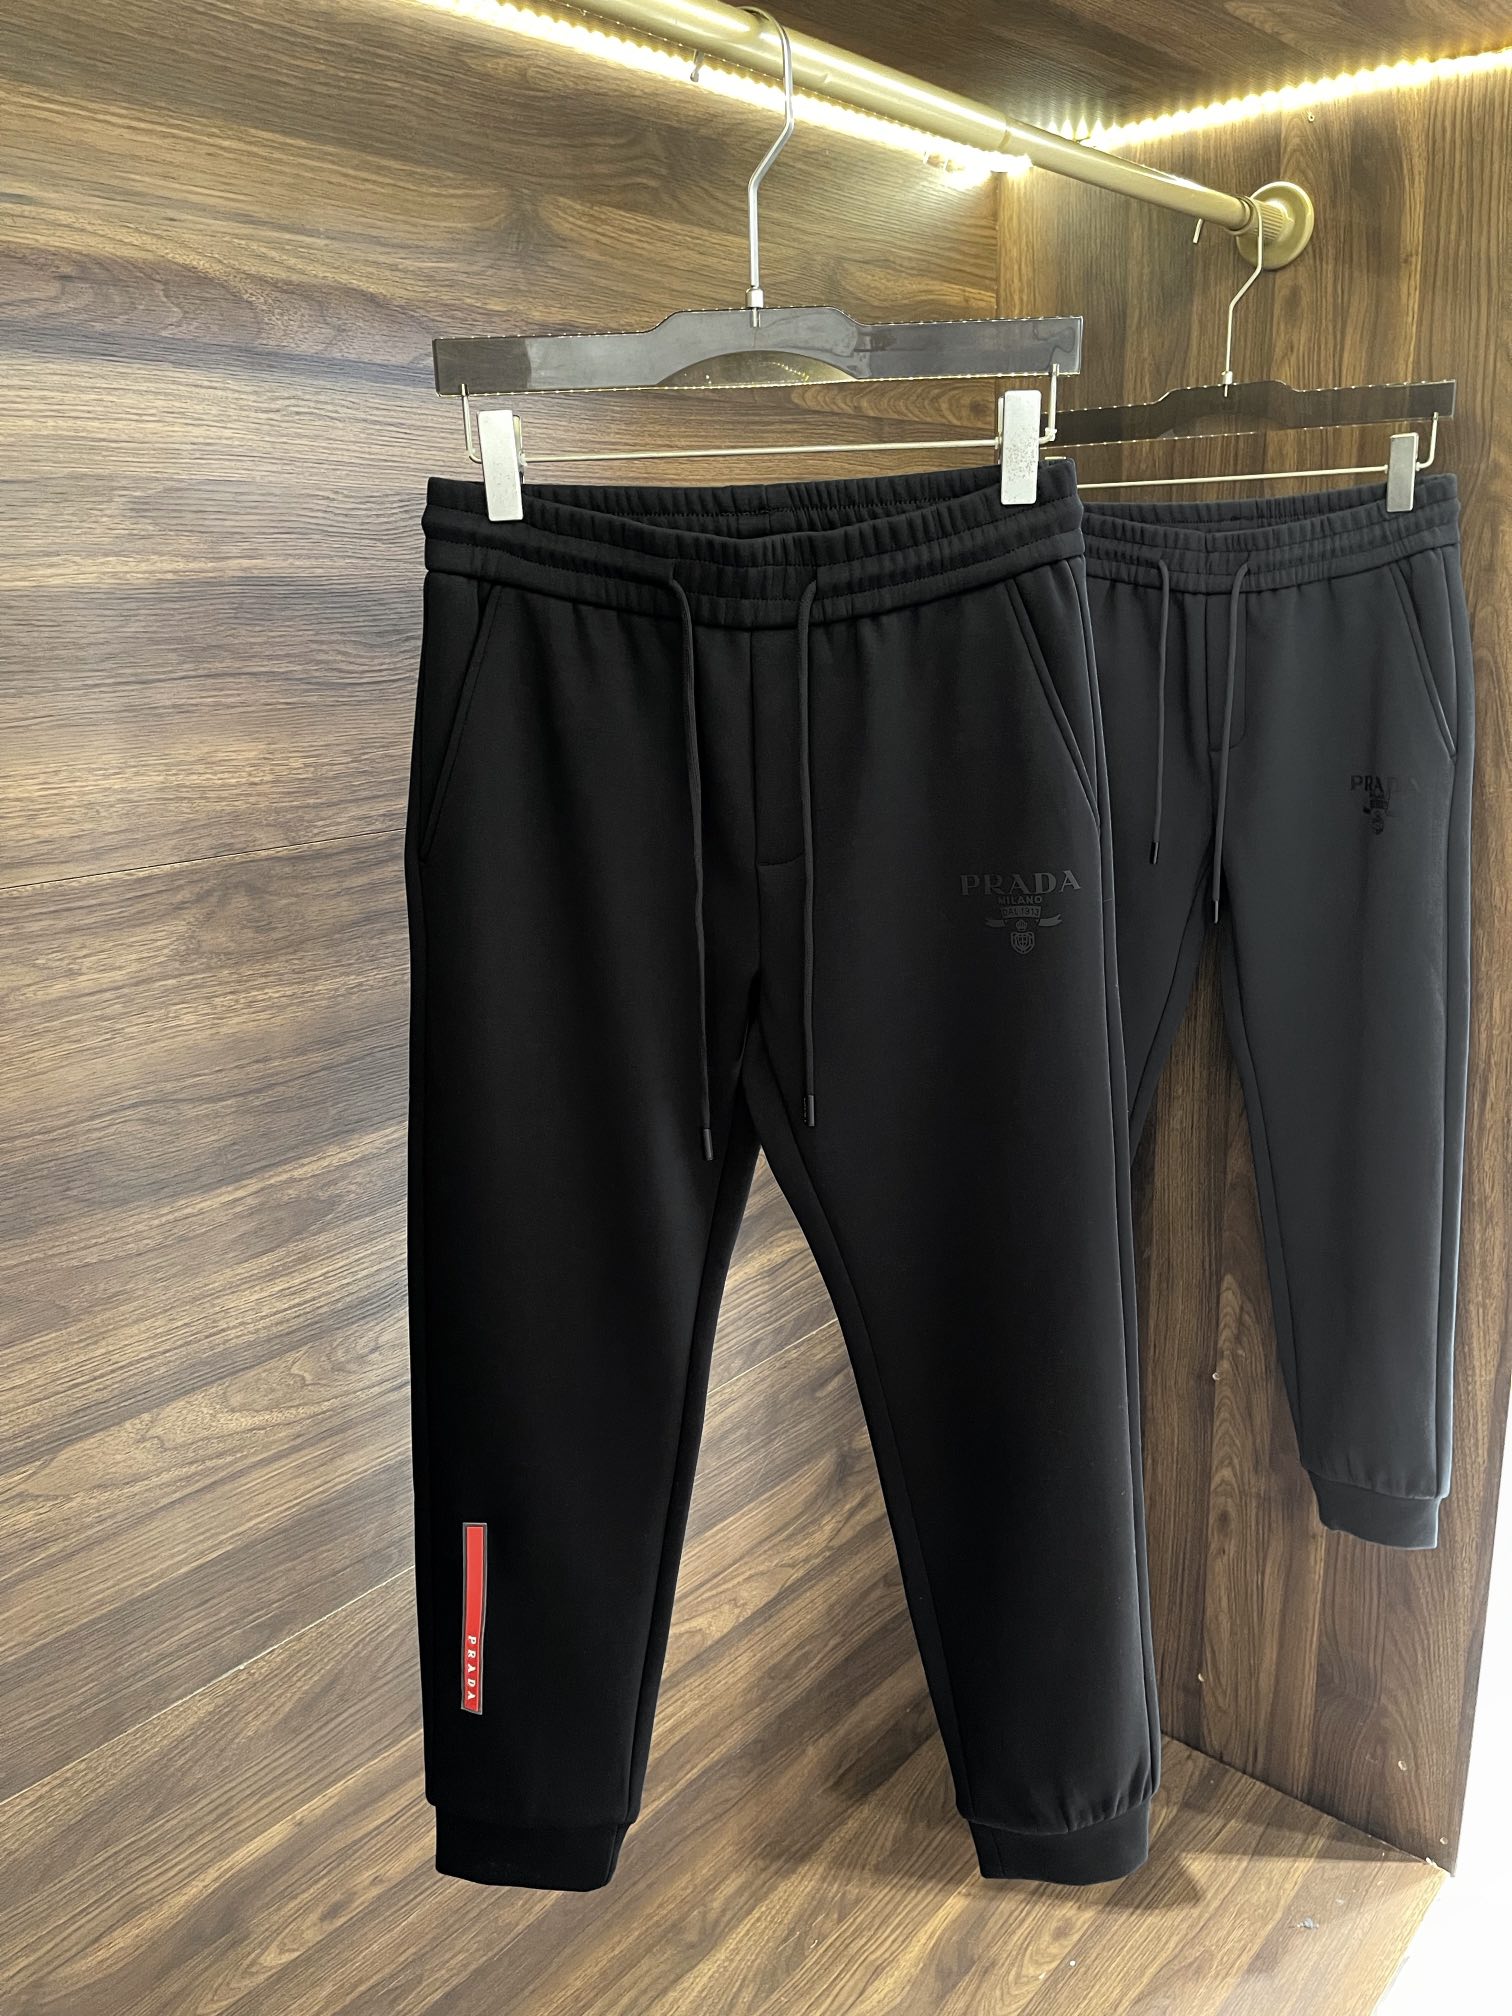 Prada Clothing Pants & Trousers Black Grey Fall/Winter Collection Casual